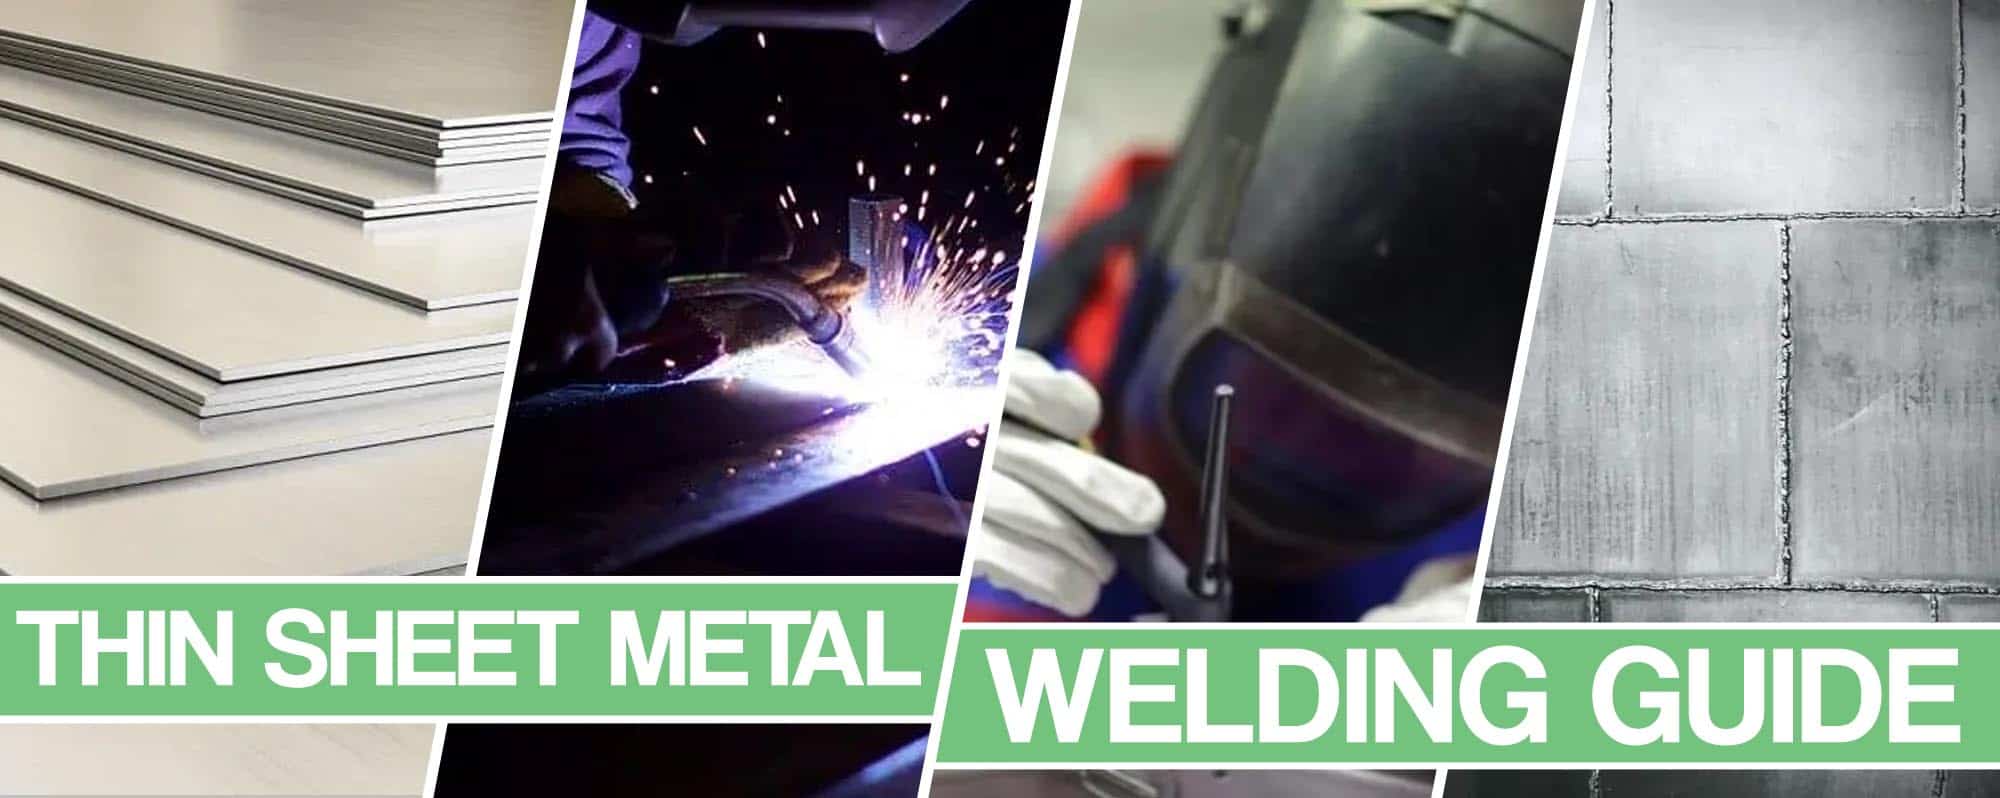 How To Weld Sheet Metal – Welding Thin Metal With TIG and MIG processes